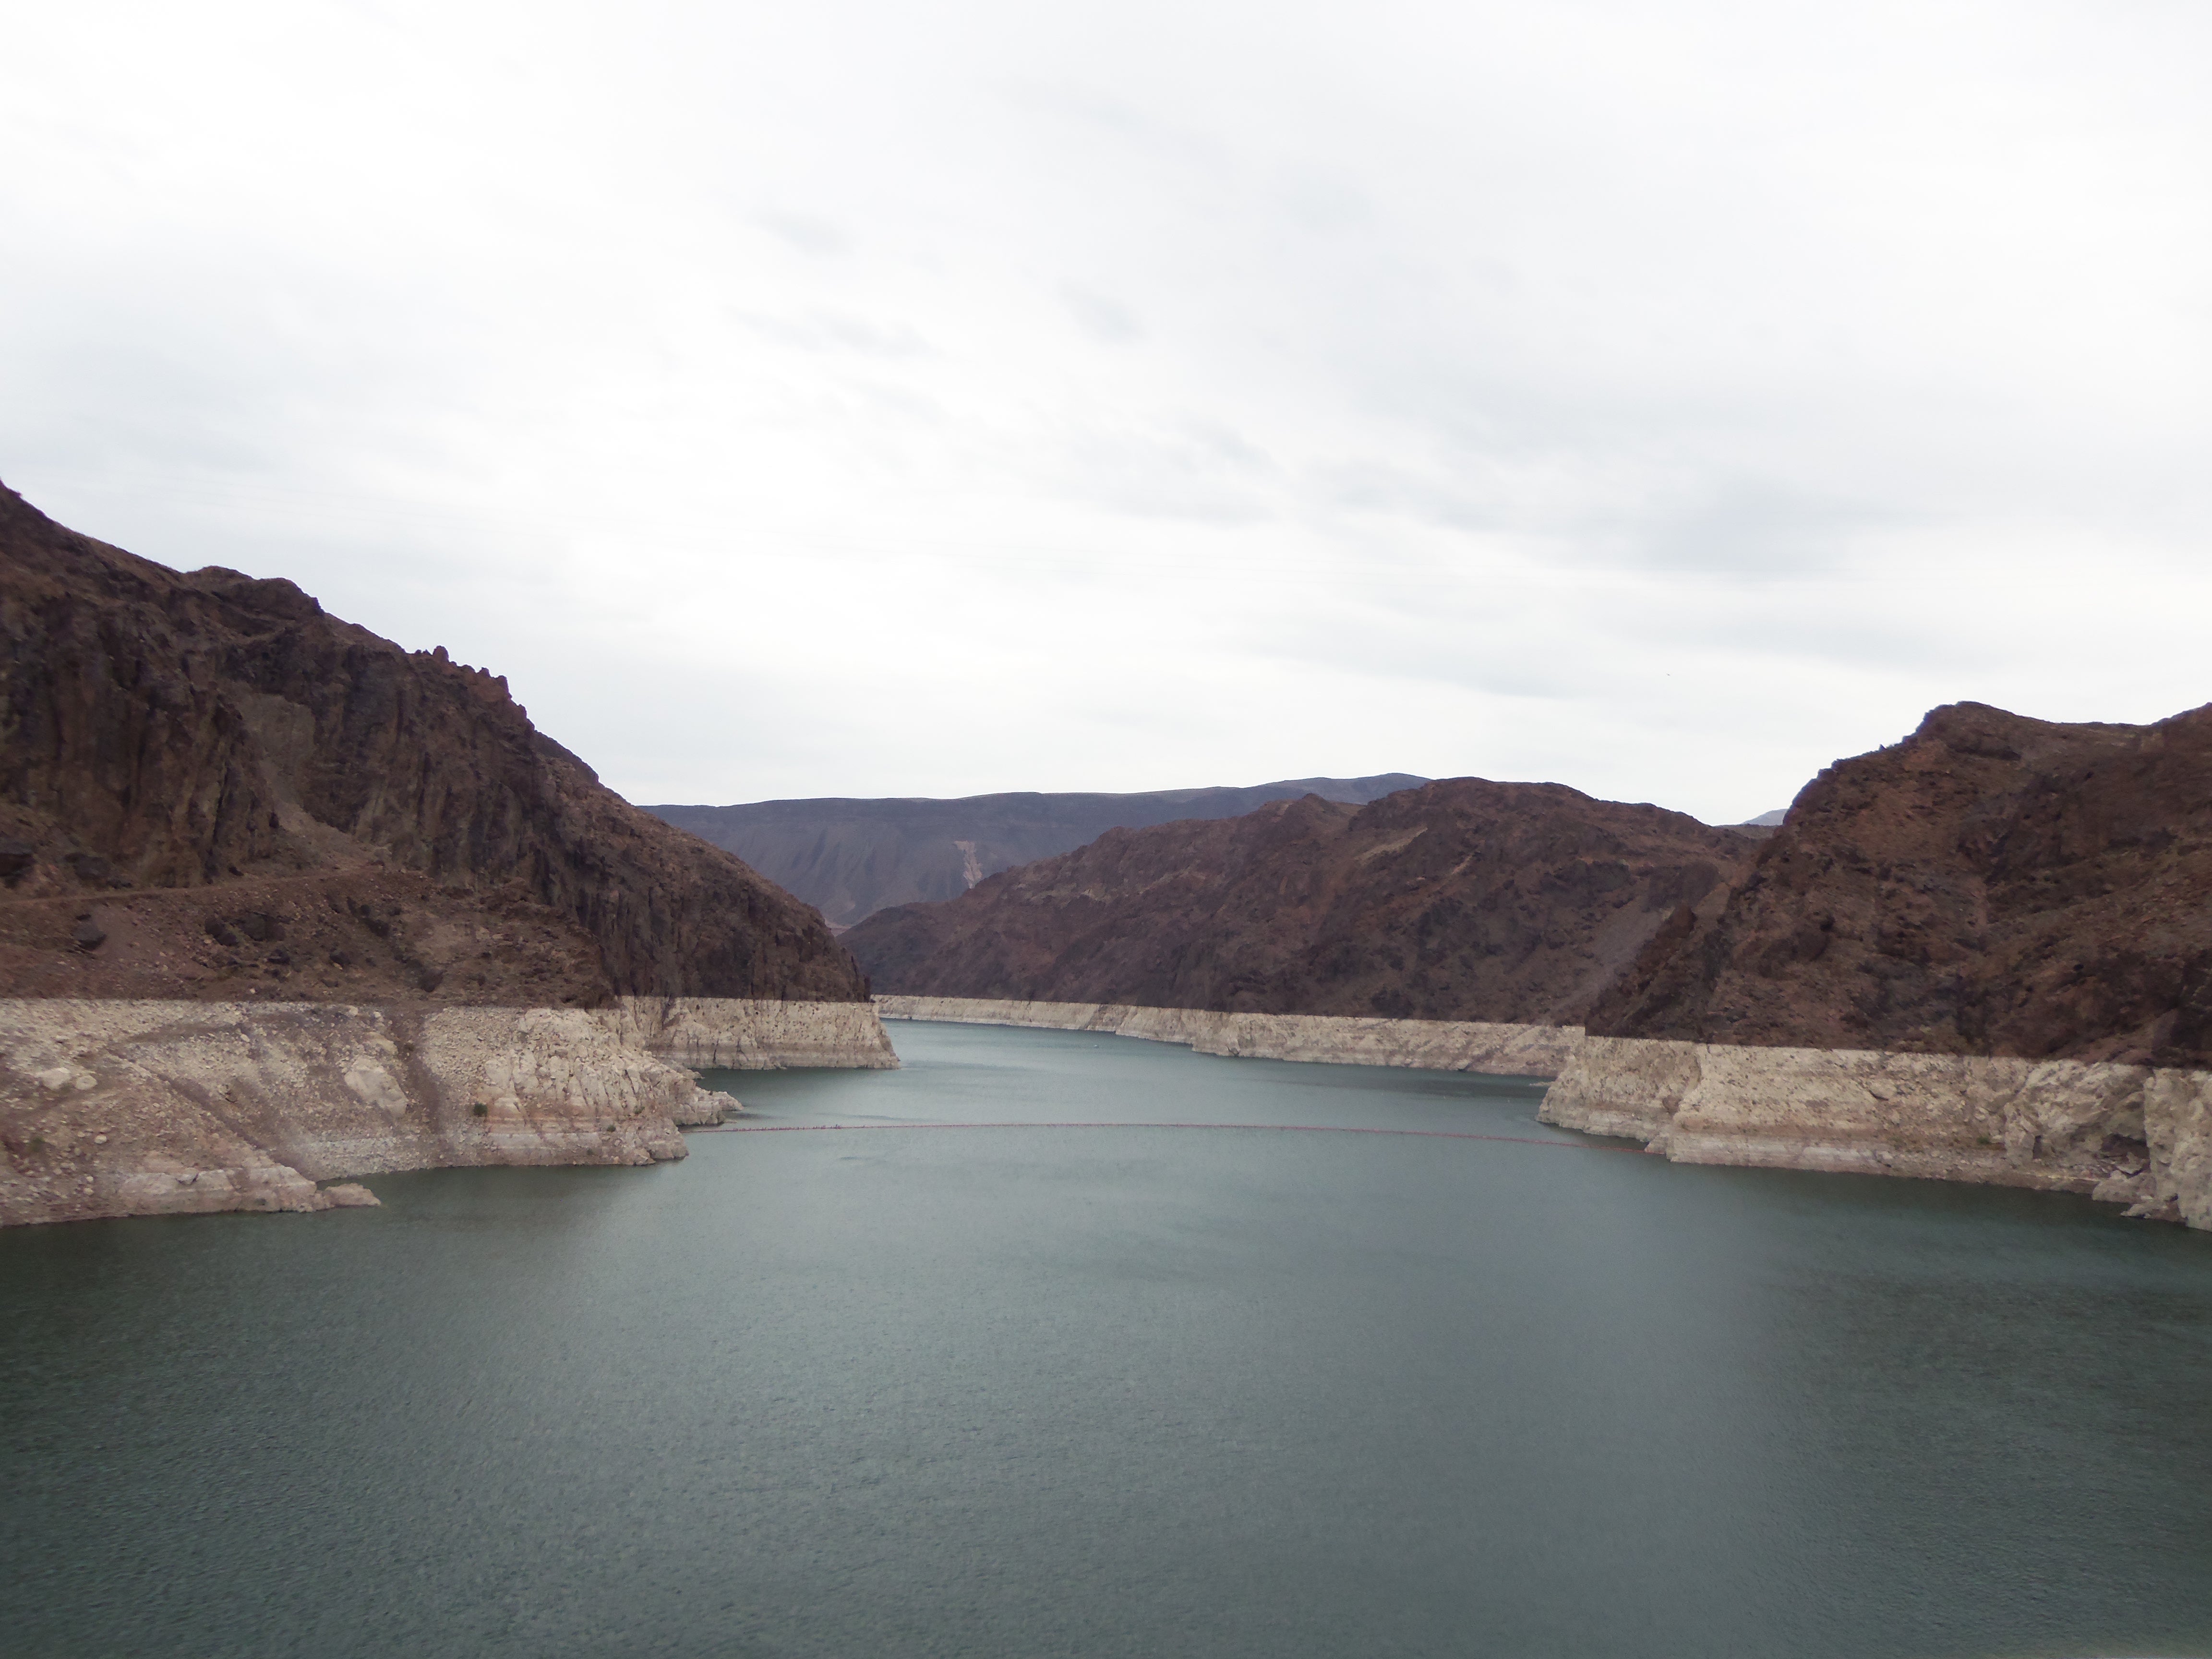 Camper submitted image from Kingman Wash — Lake Mead National Recreation Area - 2